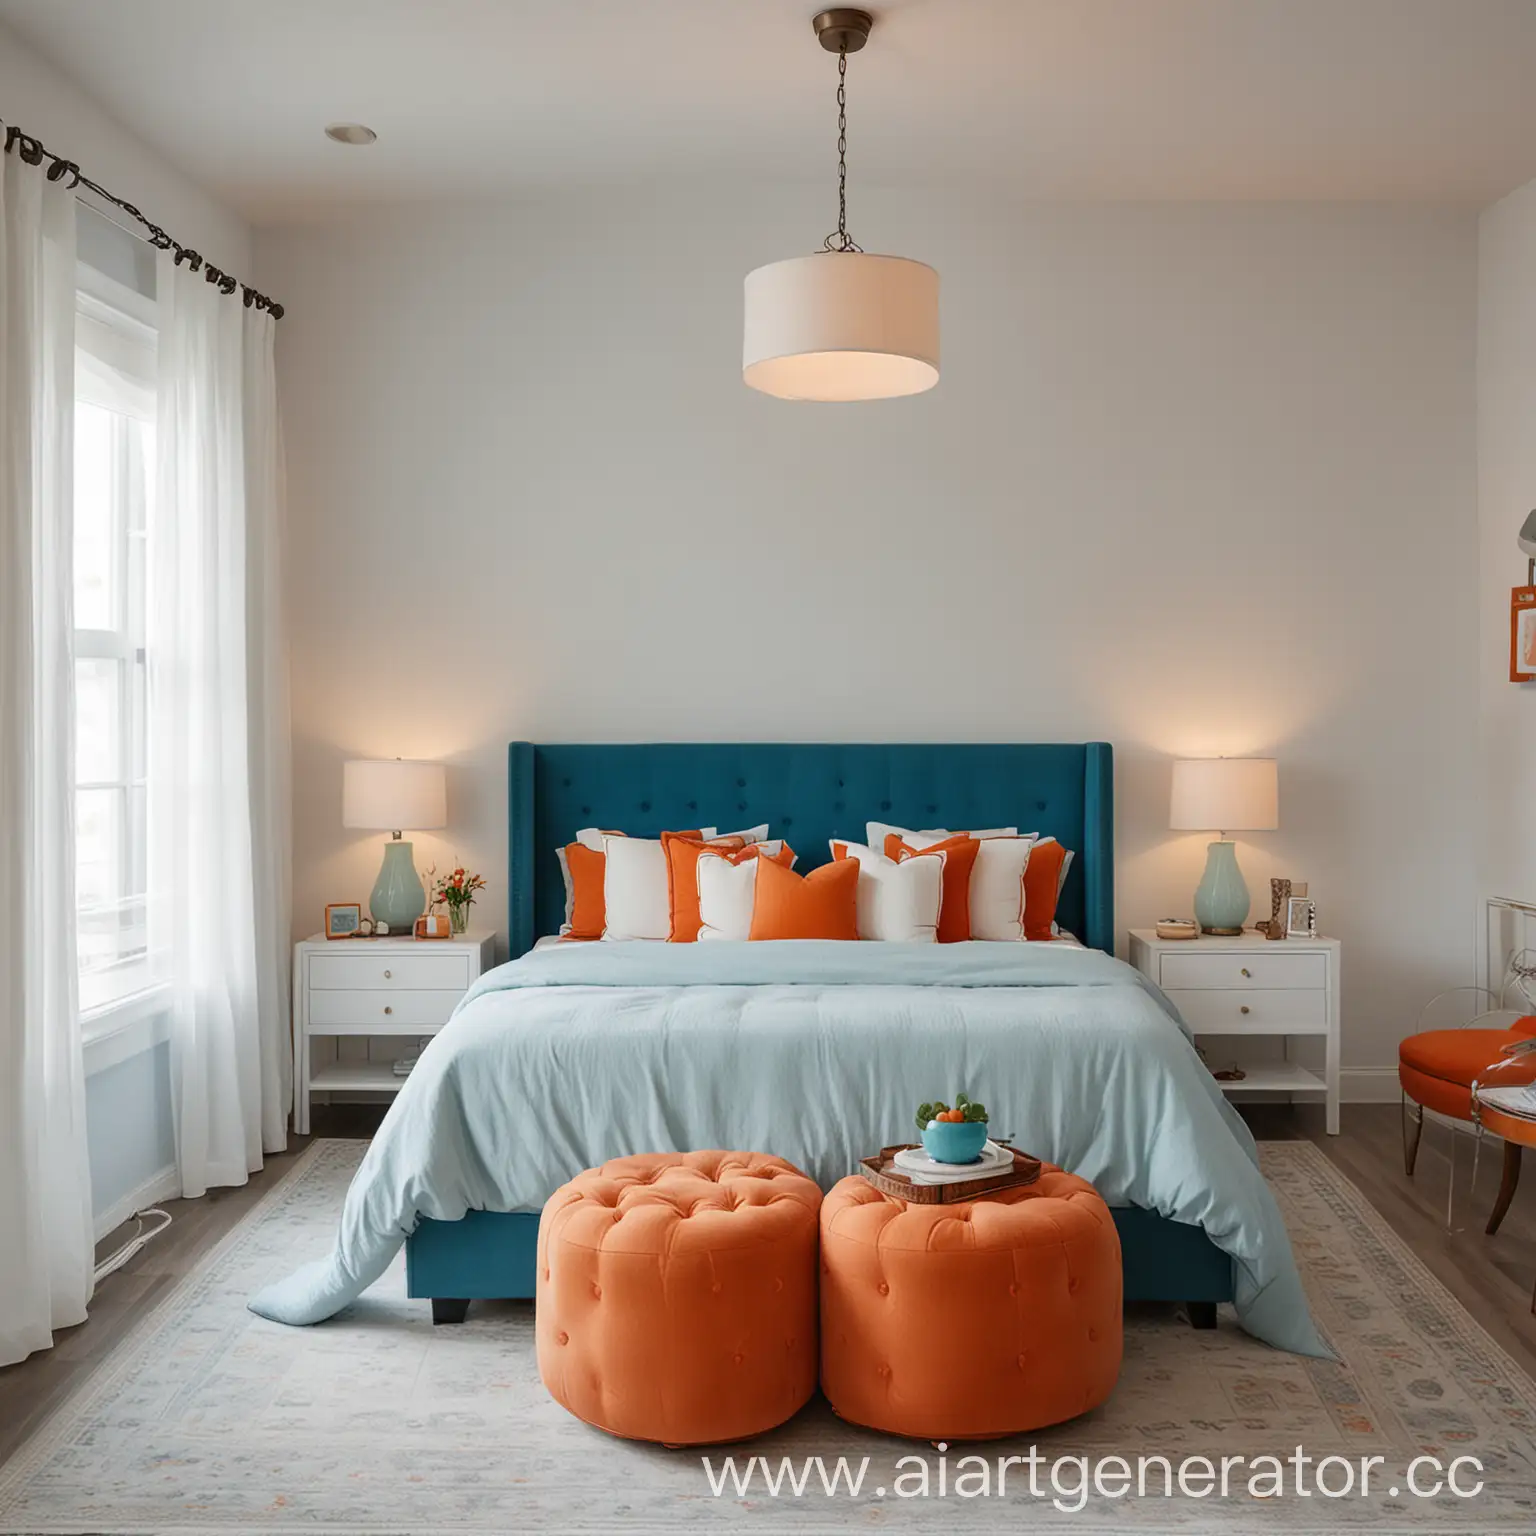 Modern-Bedroom-with-Blue-Headboard-and-Orange-Accents